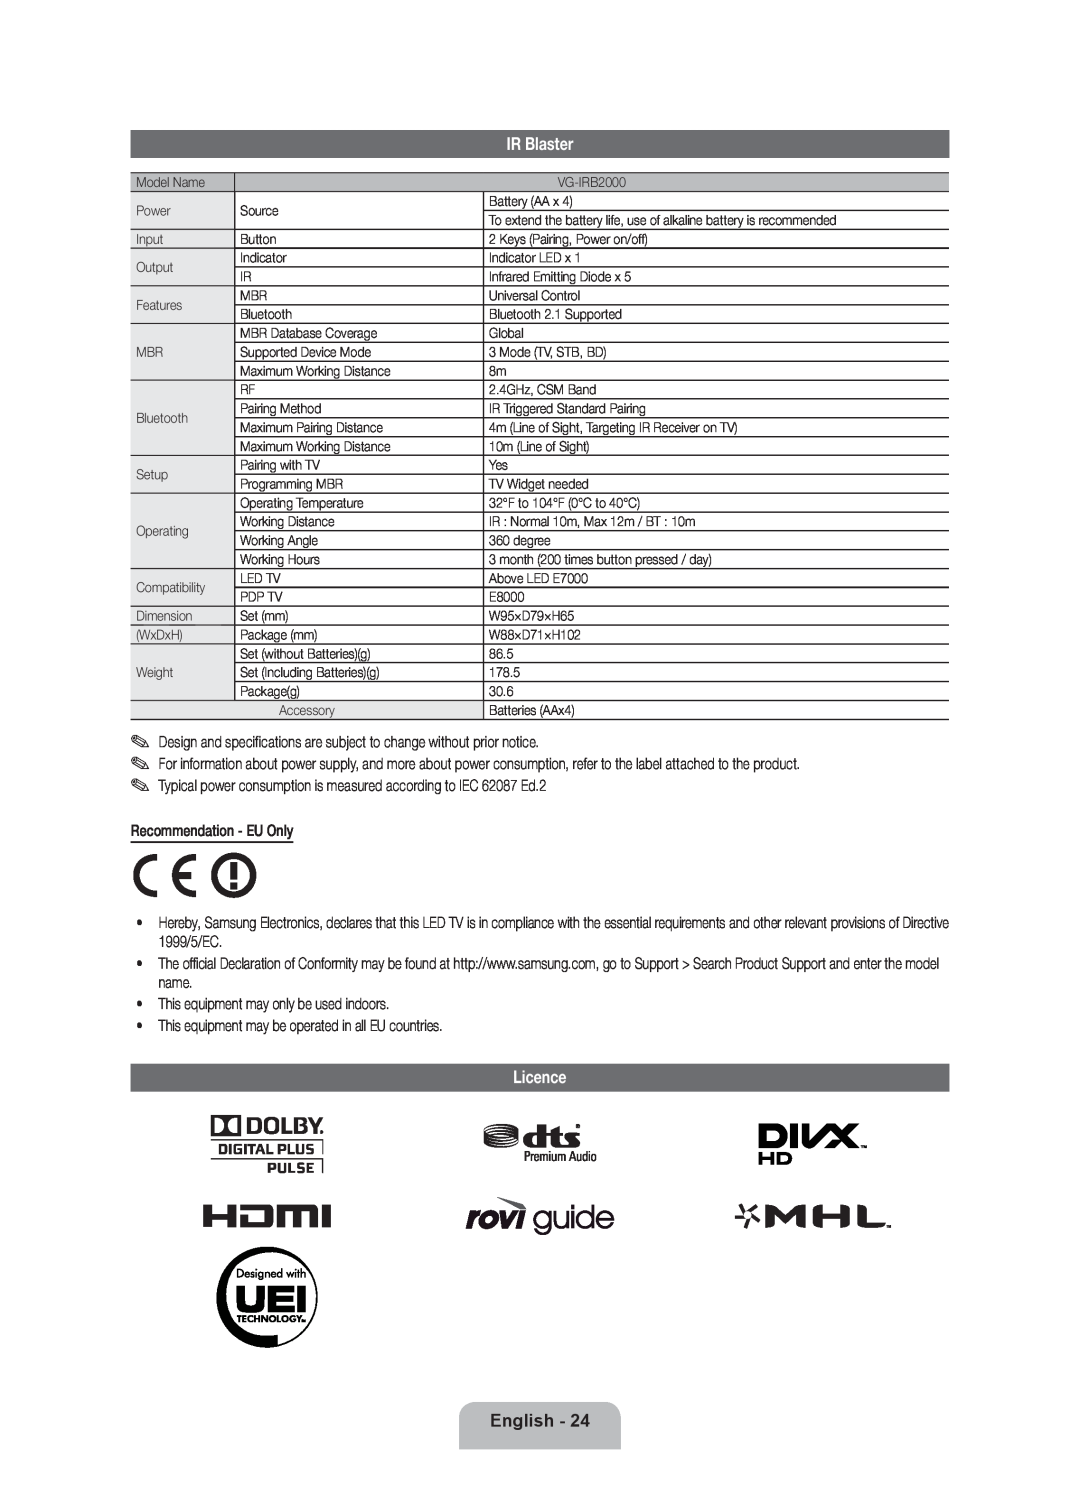 Samsung UE55D7090LSXZG IR Blaster, Licence, English, Design and specifications are subject to change without prior notice 